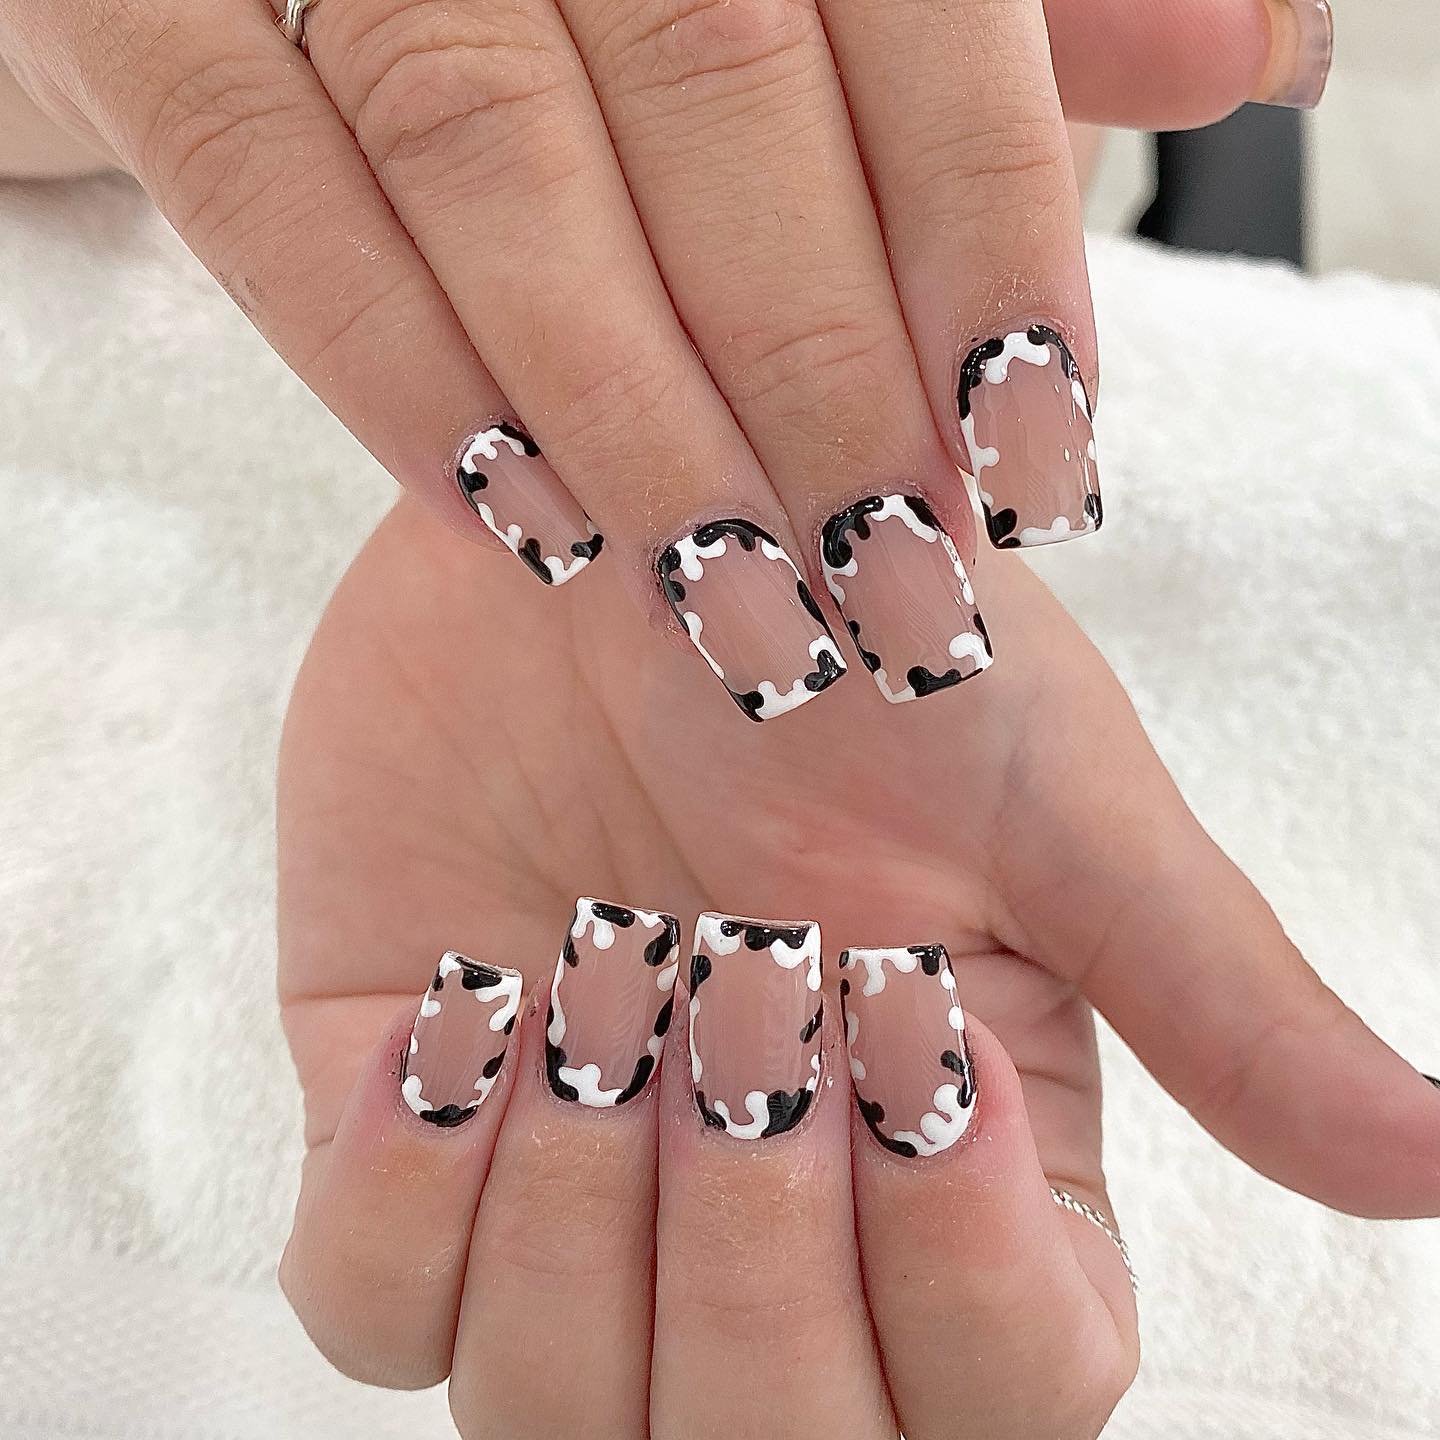 Cow print framed nails are the best! It is so unique and interesting, and the final look is incredible. The contrast between white and black is what makes these nails amazing. Plus, the frames give it a really interesting effect.